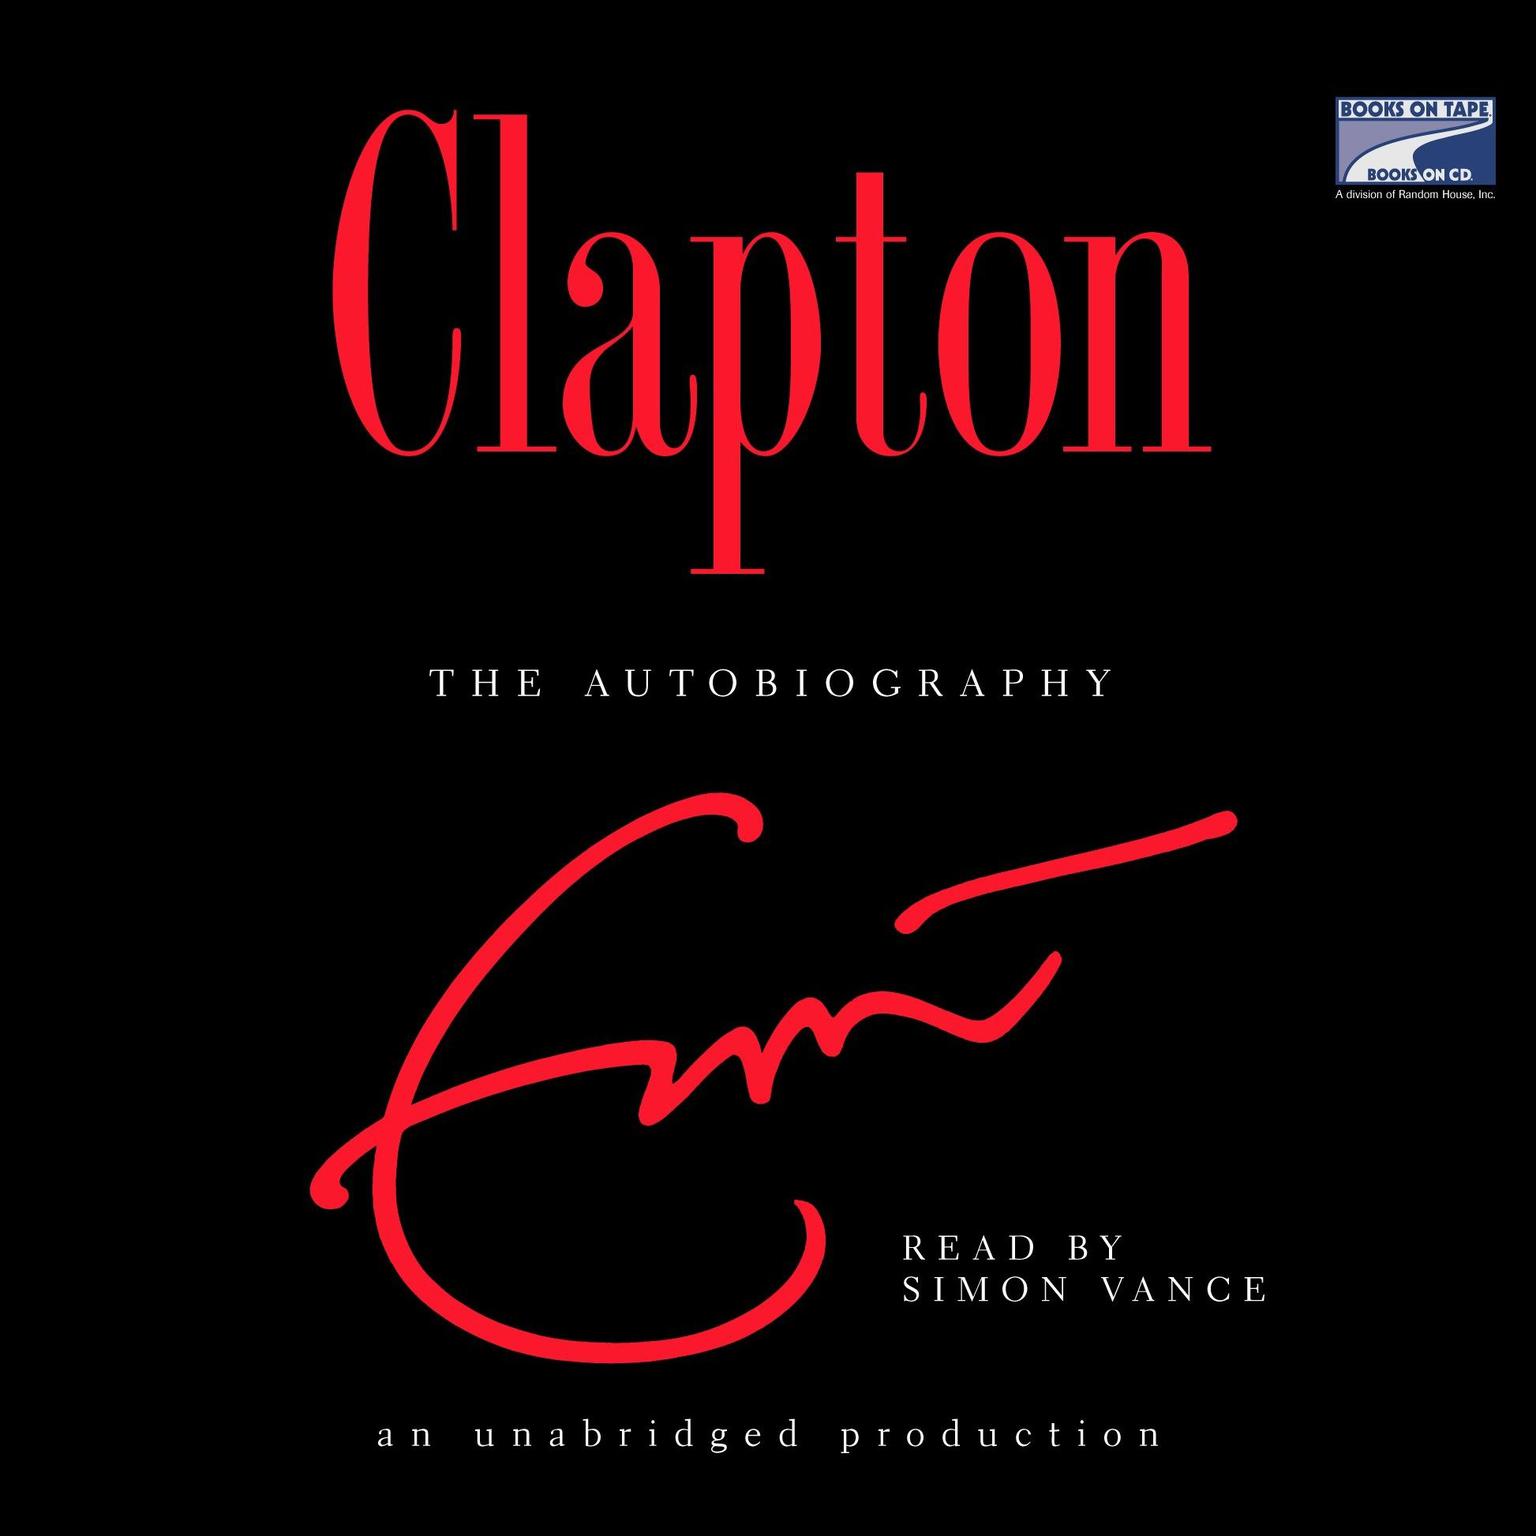 Clapton: The Autobiography Audiobook, by Eric Clapton